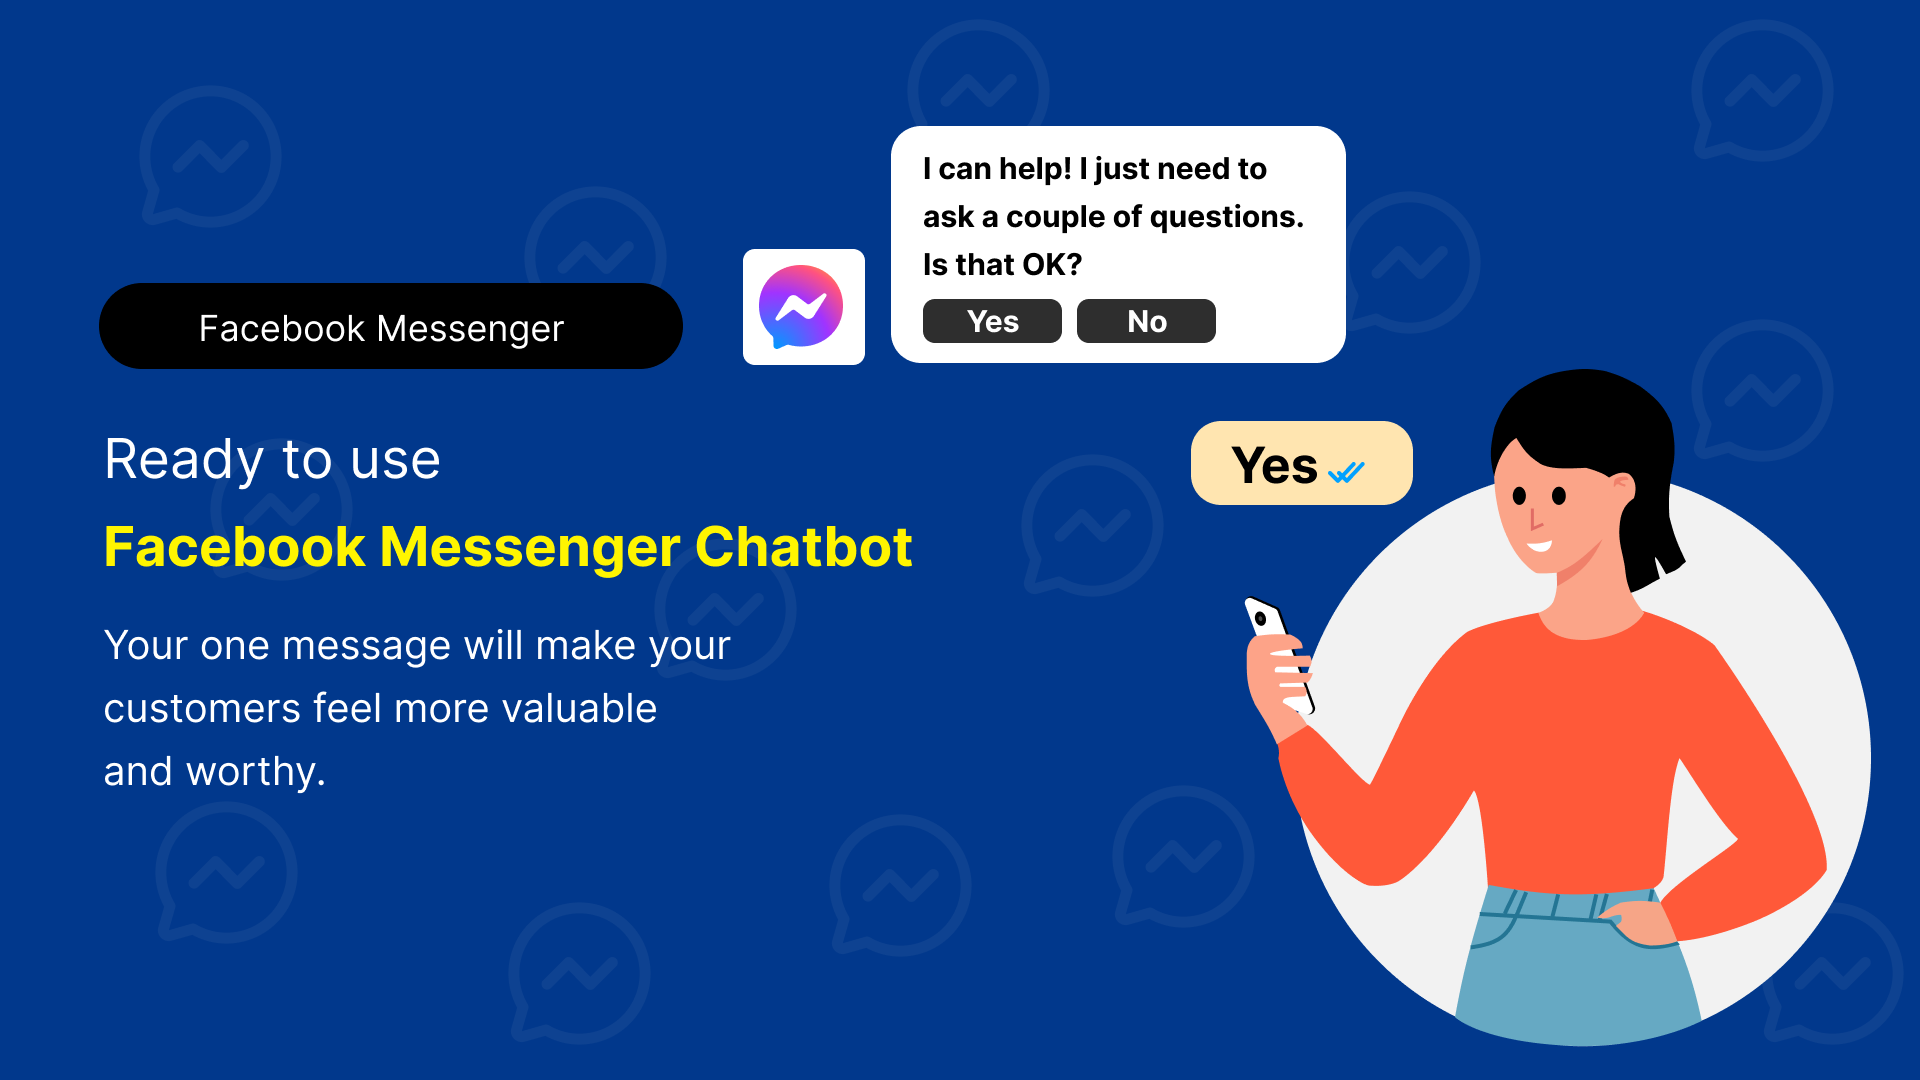 Your Guide to the Facebook Messenger Chatbots